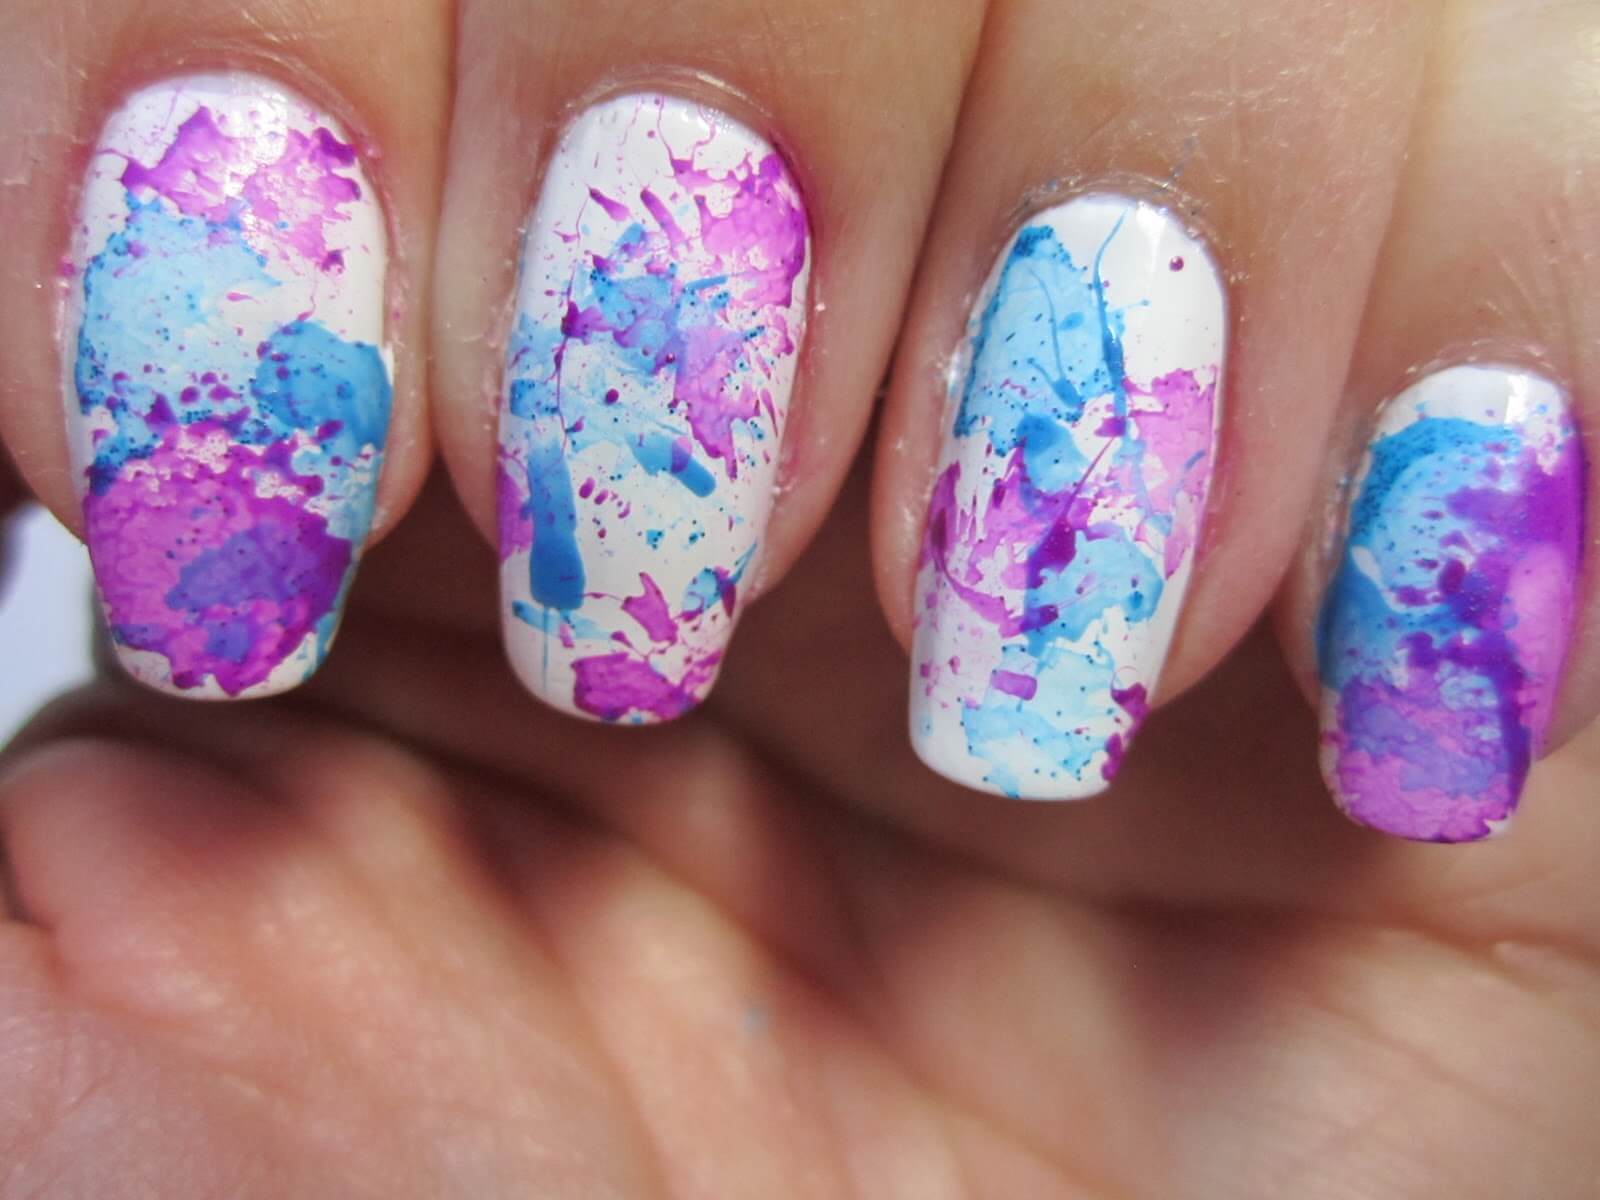 Colorful Nail Art Designs with Glitter and Rhinestones - wide 8